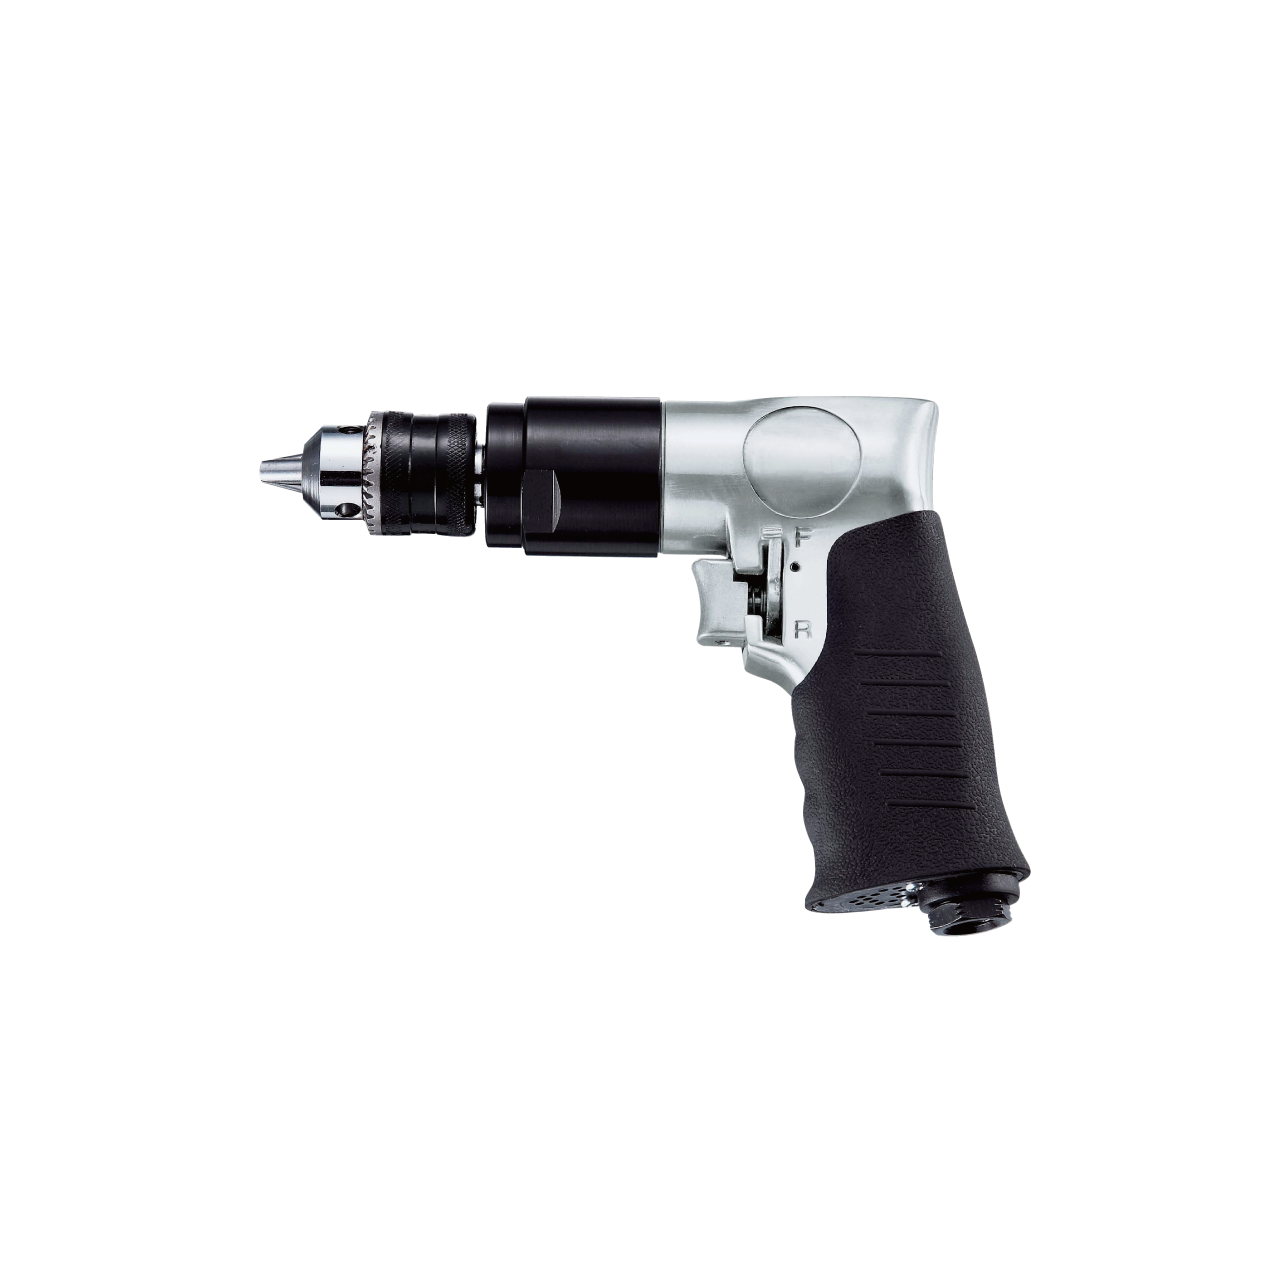 1/2" Dr. Reversible Drill